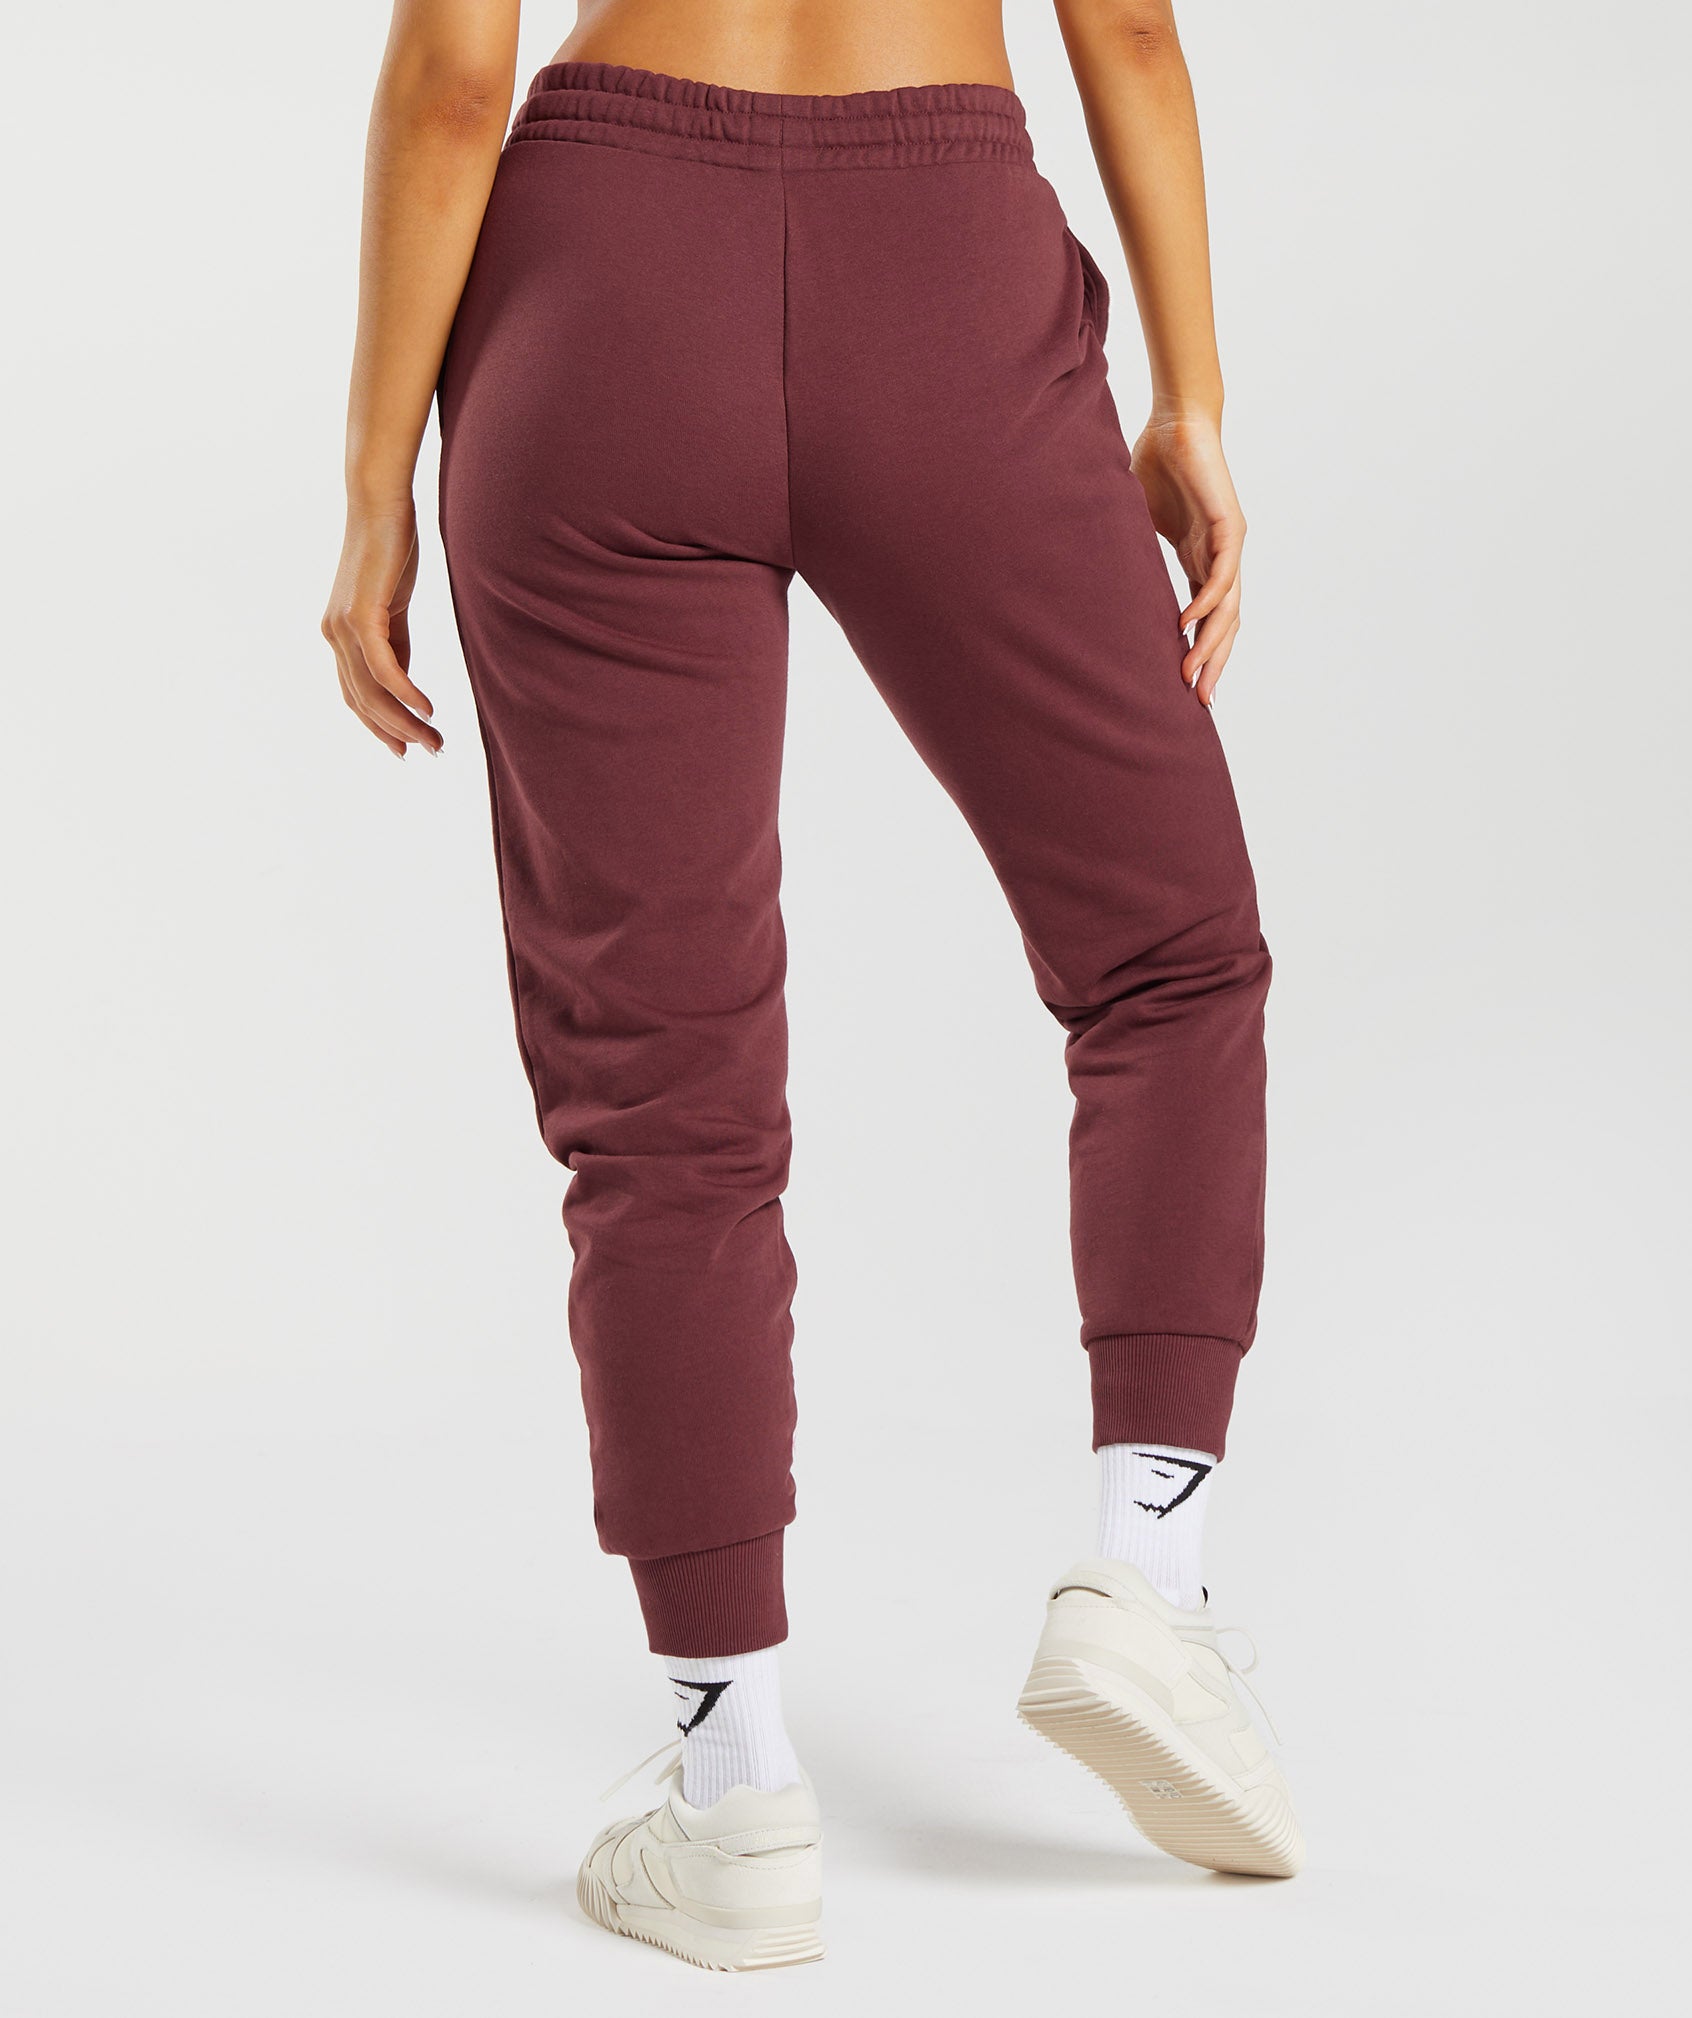 Social Club Joggers in Cherry Brown - view 2